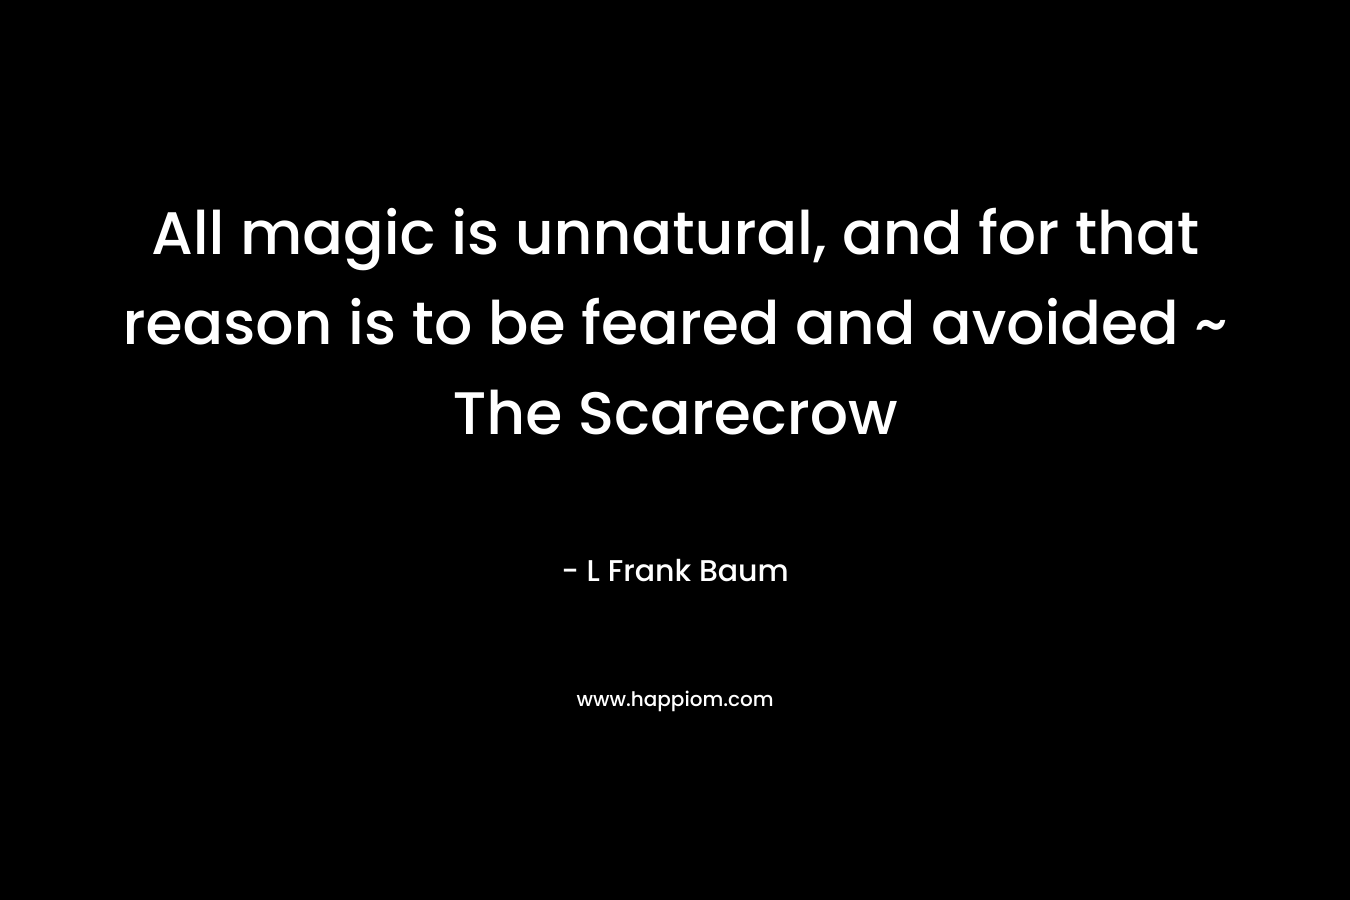 All magic is unnatural, and for that reason is to be feared and avoided ~ The Scarecrow – L Frank Baum